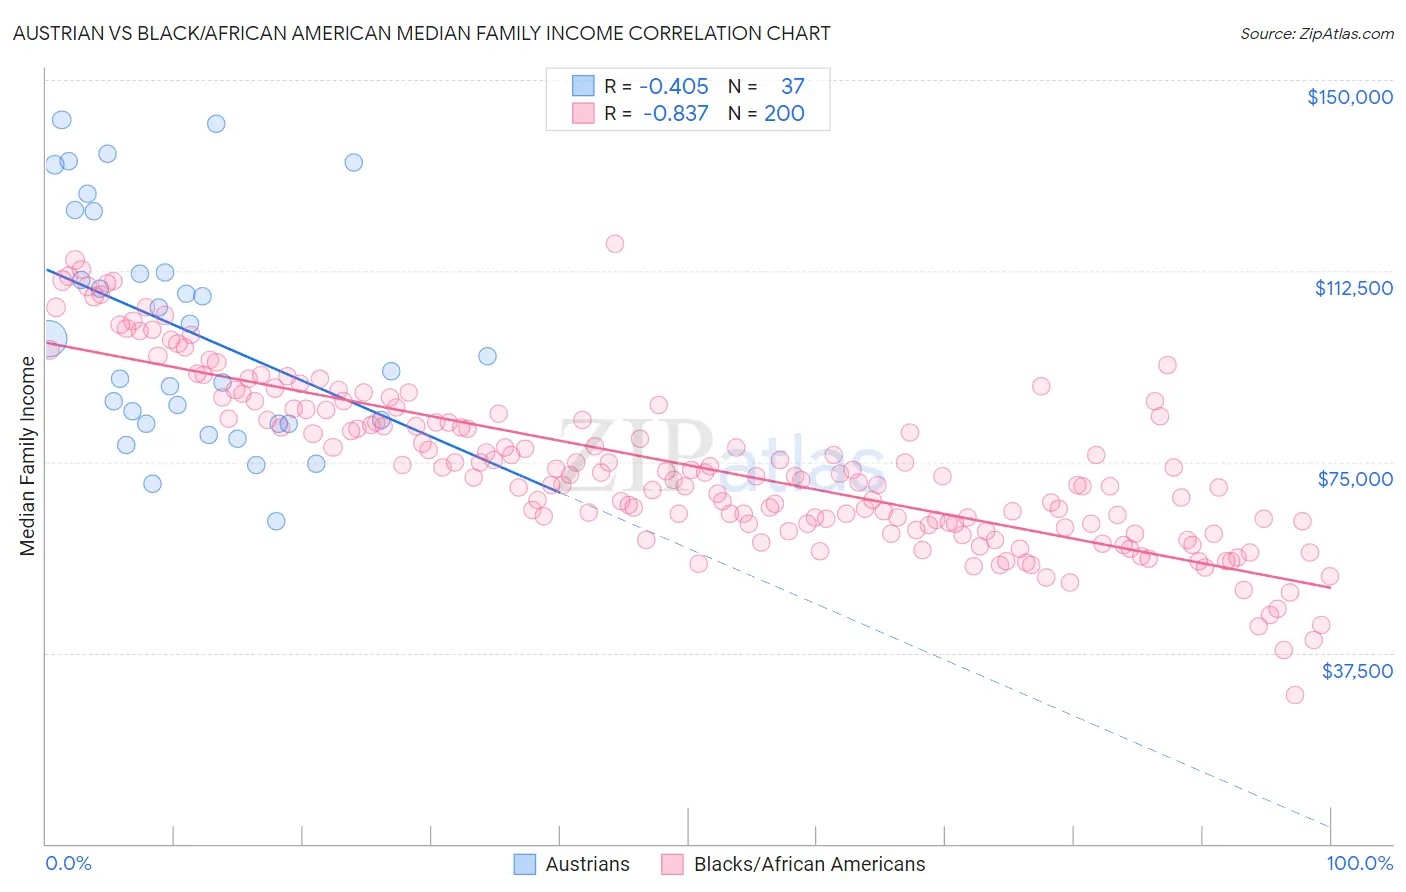 Austrian vs Black/African American Median Family Income